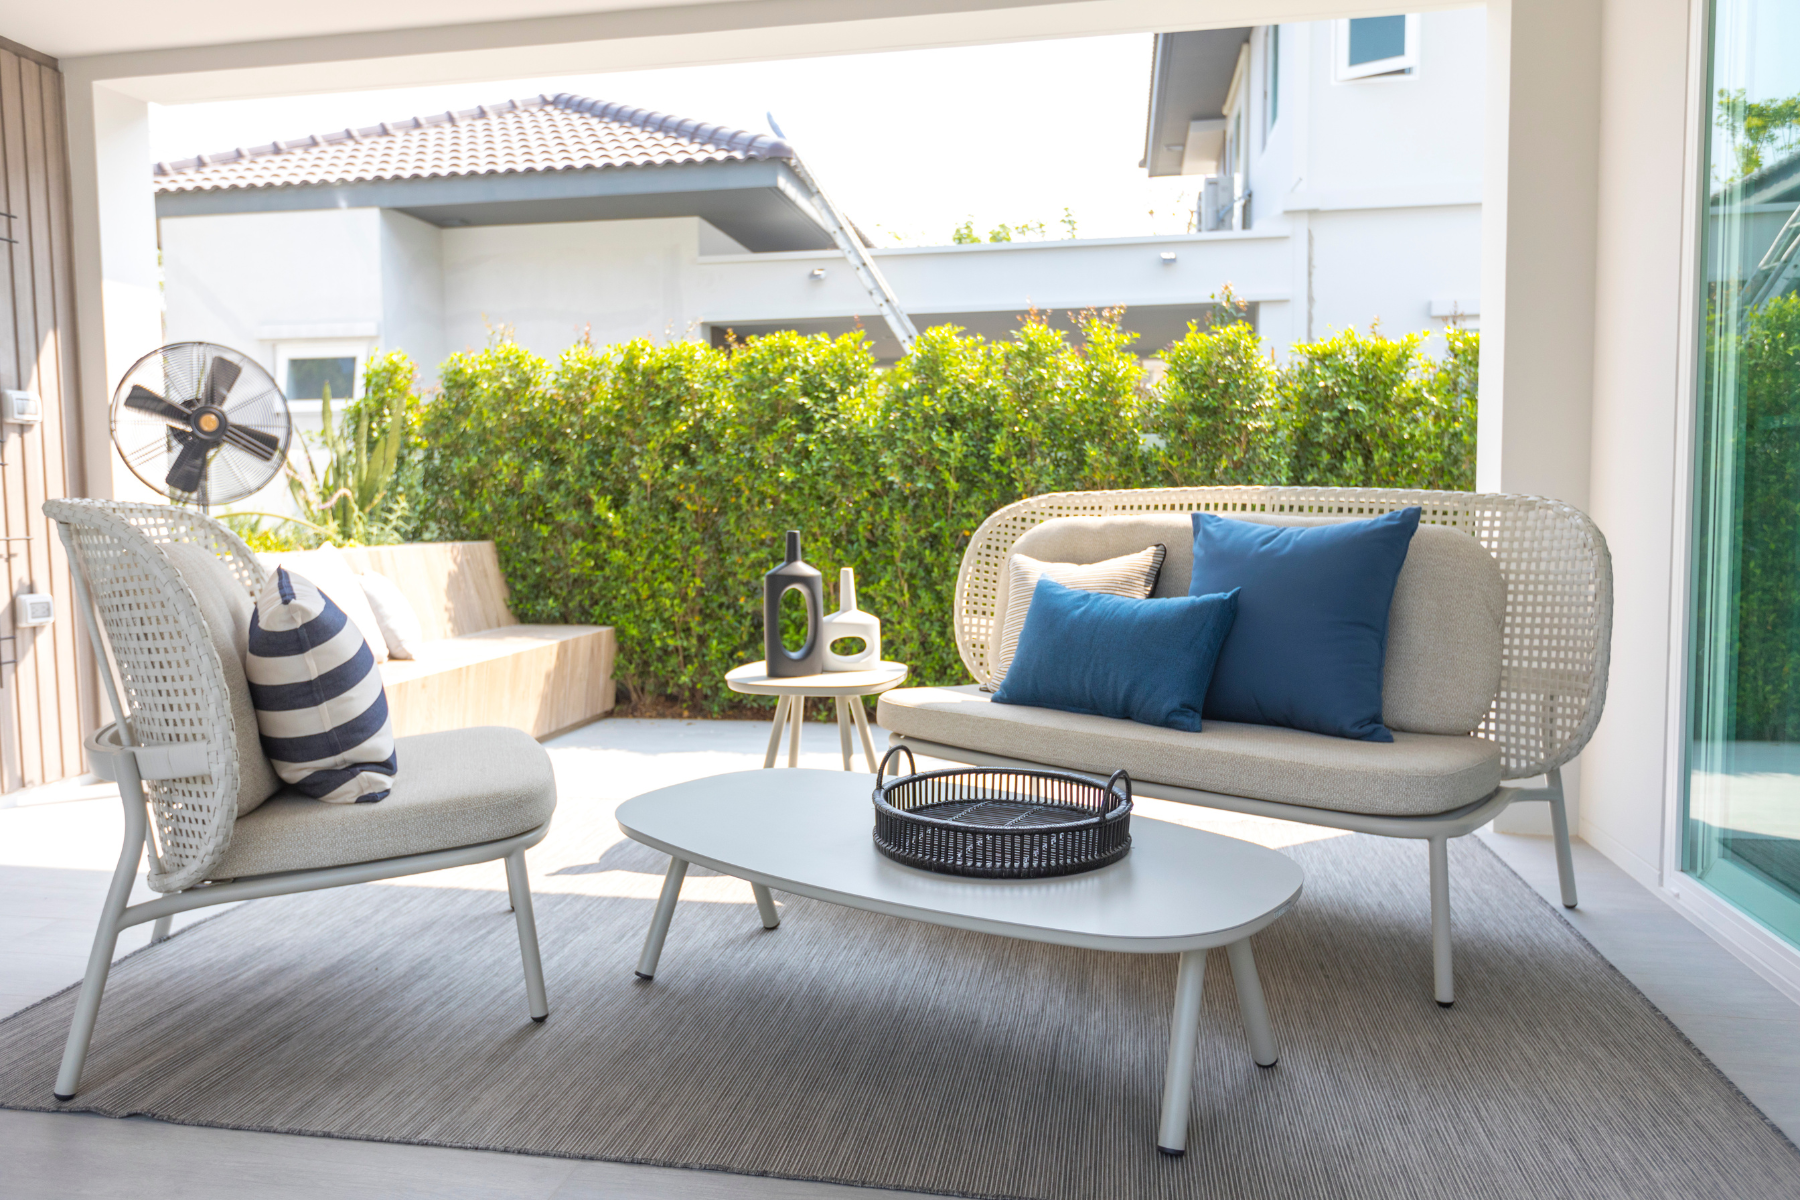 A modern minimalist patio set with aluminum furnishings with neutral and blue tones for the cushions